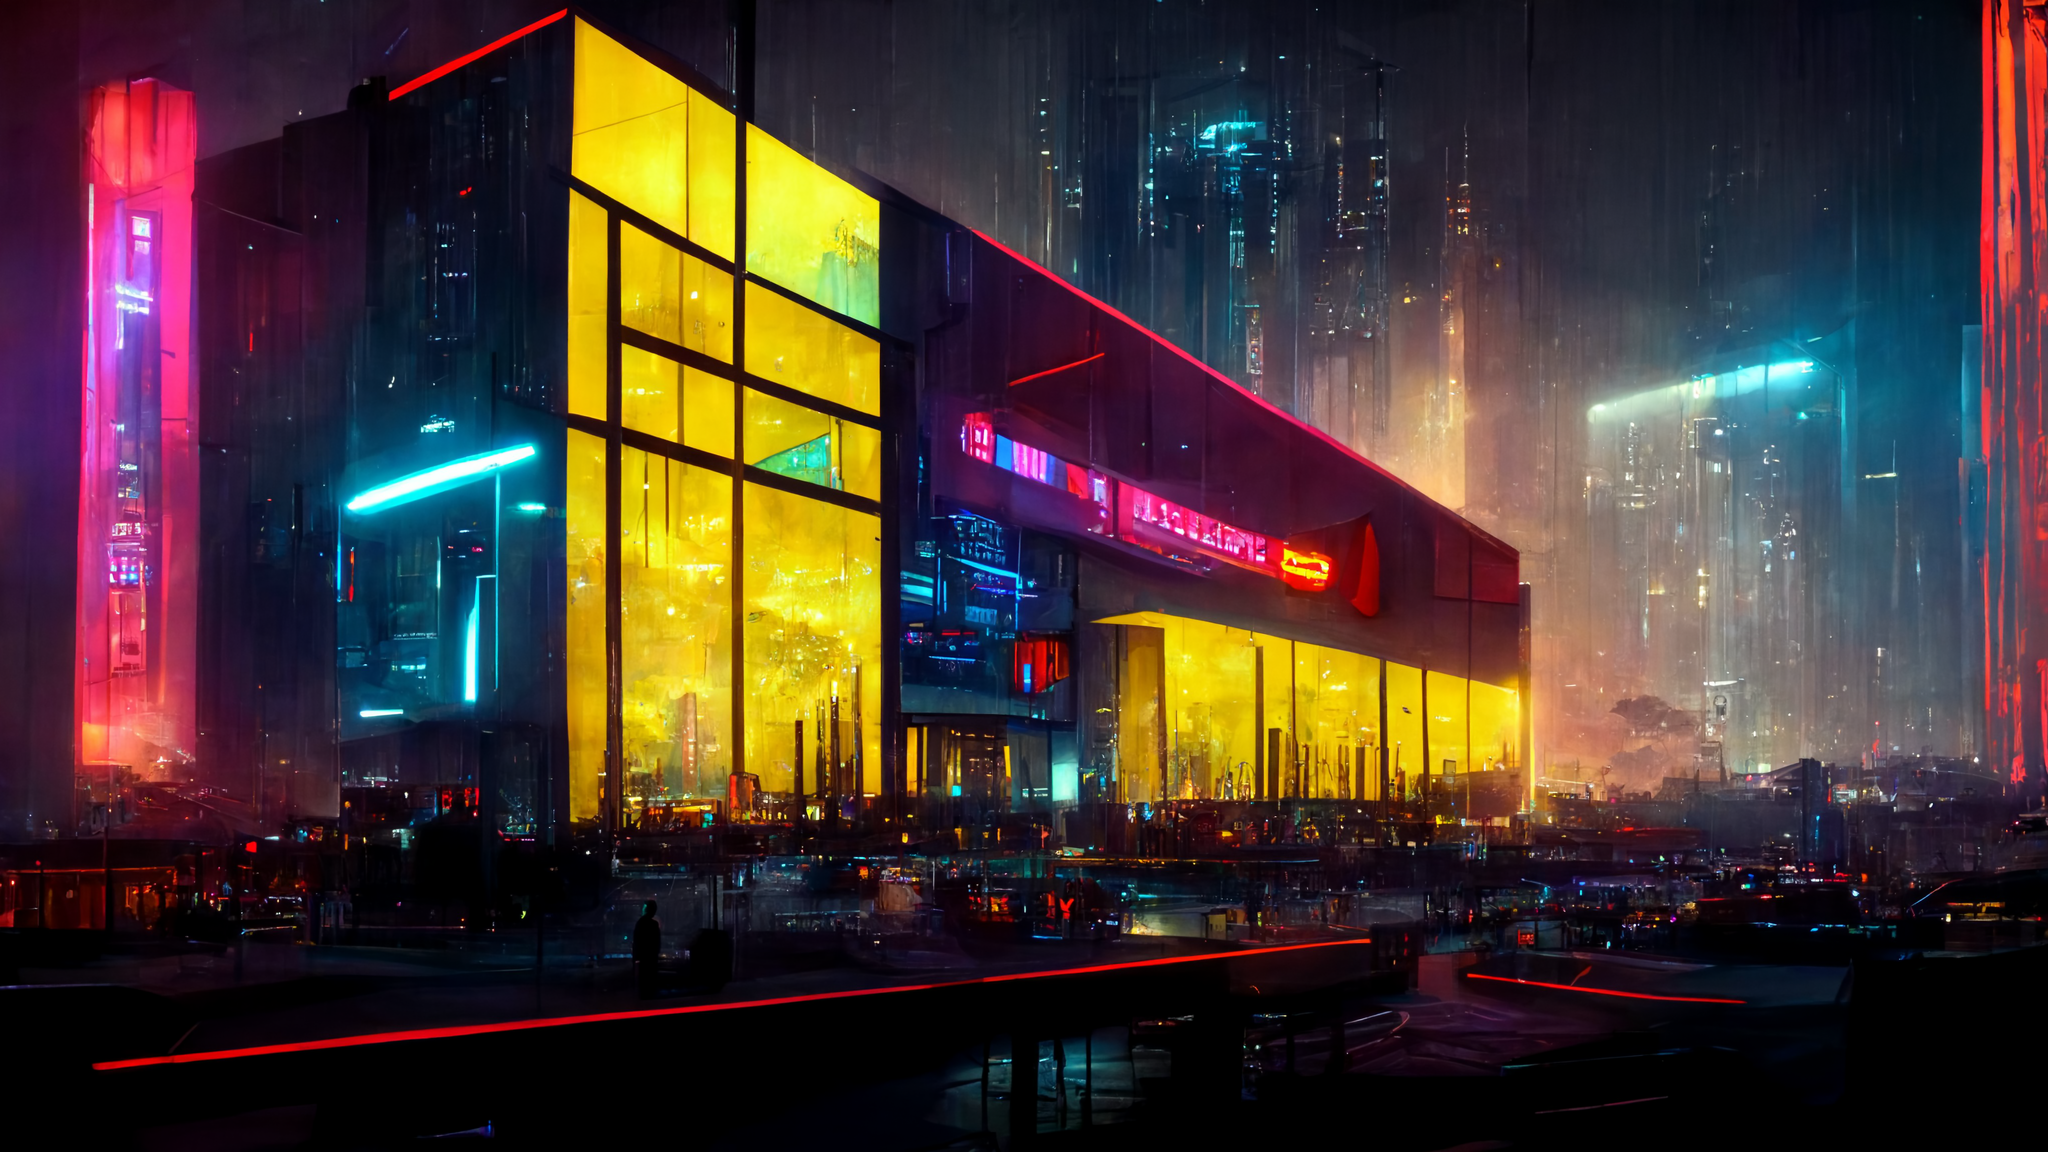 SysteMATTically_Futuristic_cyberpunk_abstract_architecture_buil_8cc3152b-18af-4caa-8c60-b255af330038.png